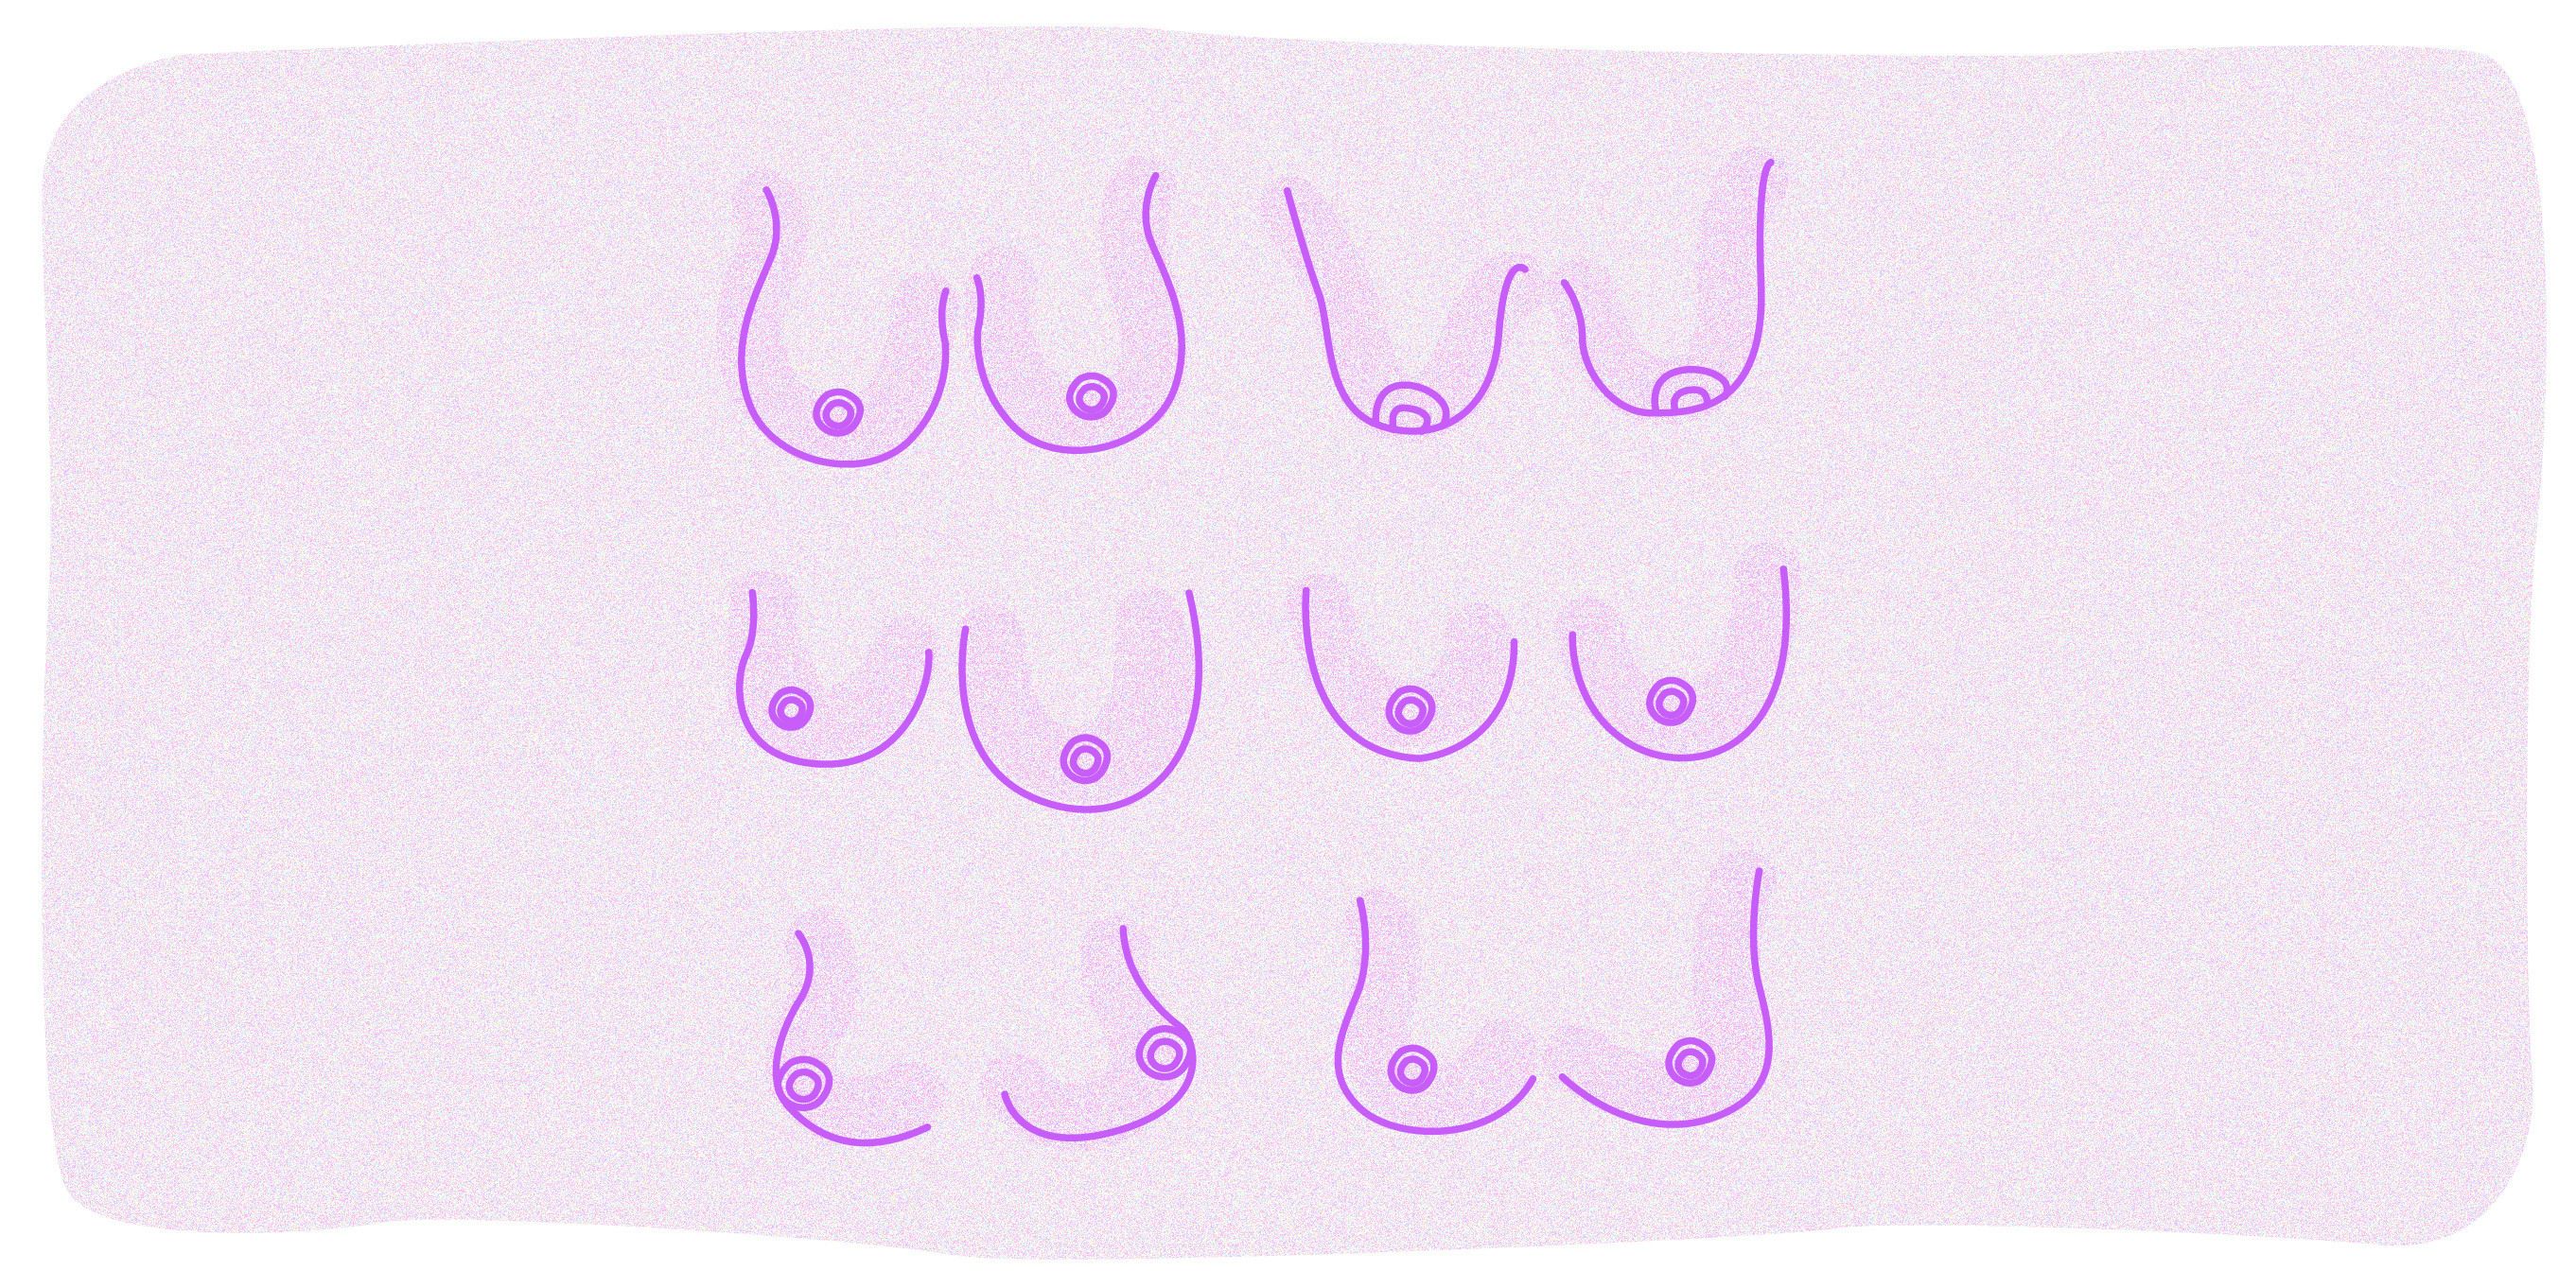 breast sizes examples